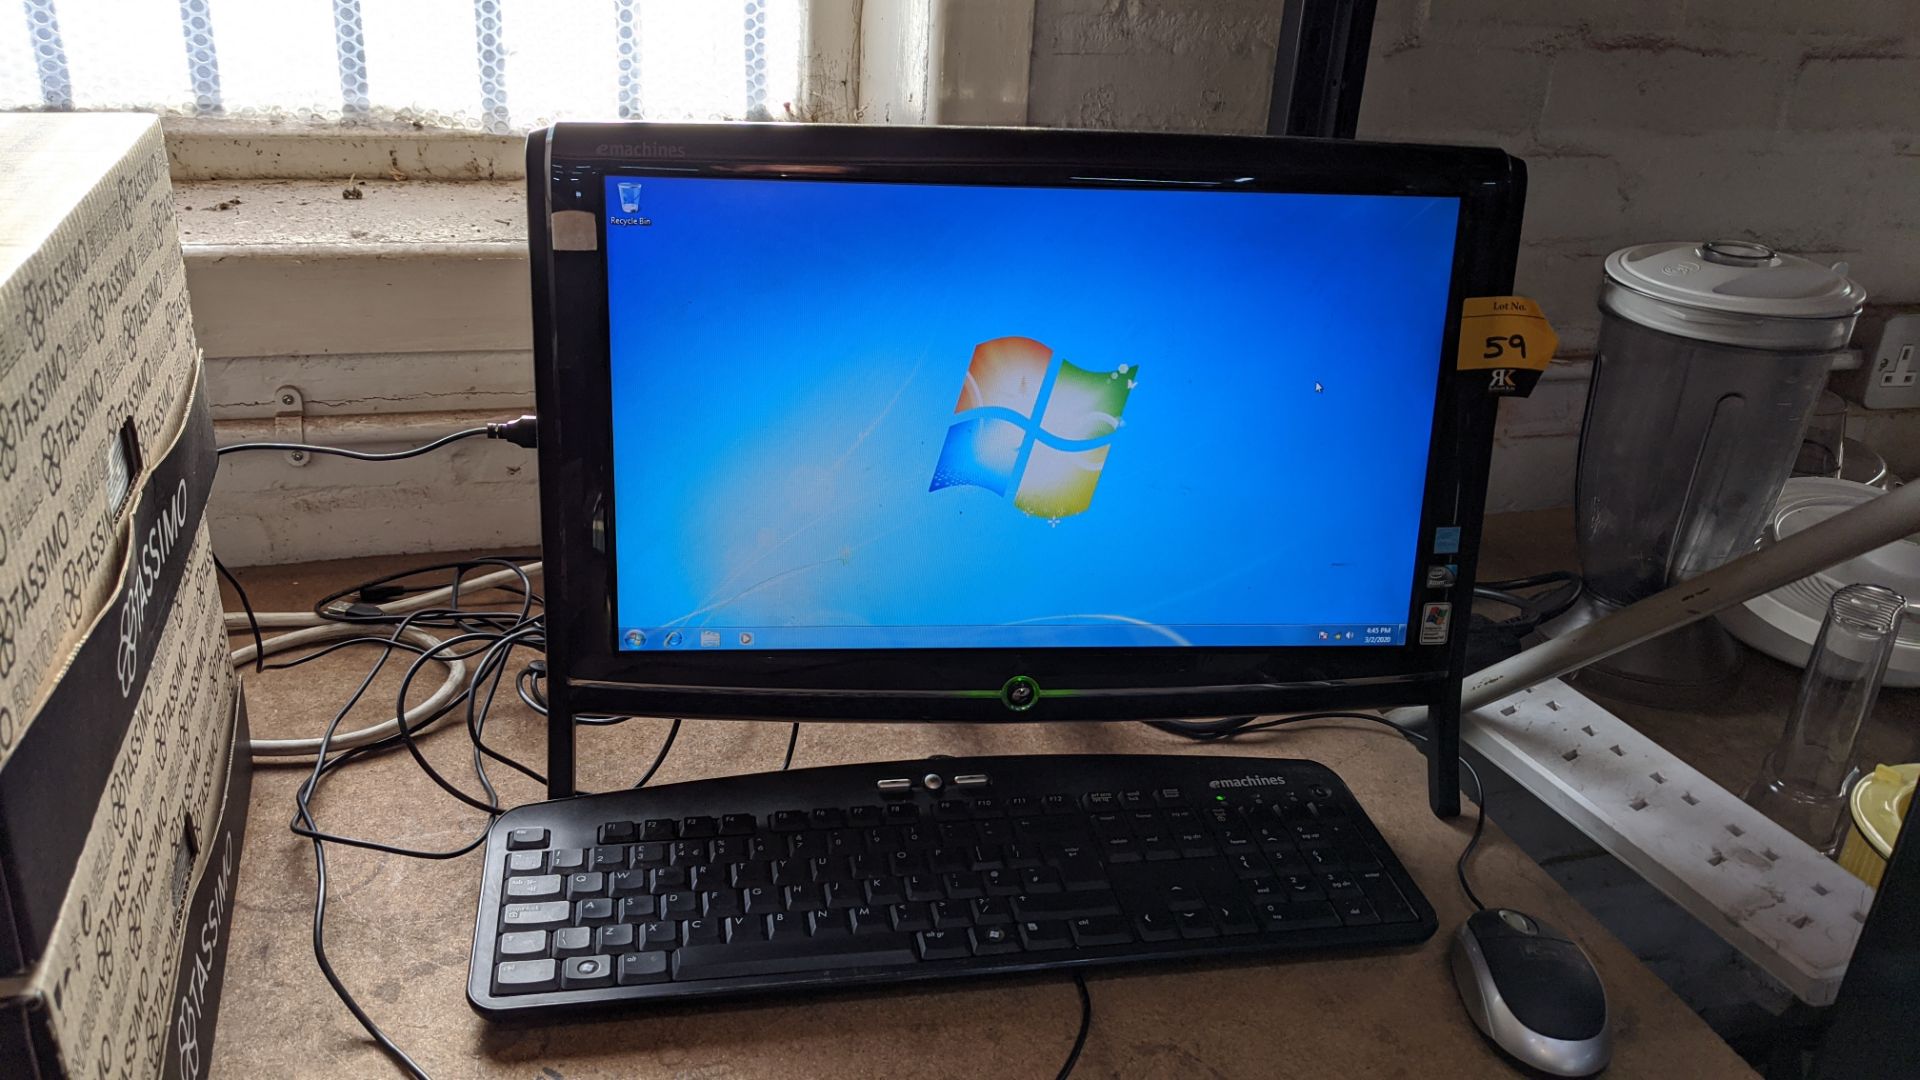 All-in-one computer with built-in monitor plus separate keyboard & mouse. IMPORTANT: This auction is